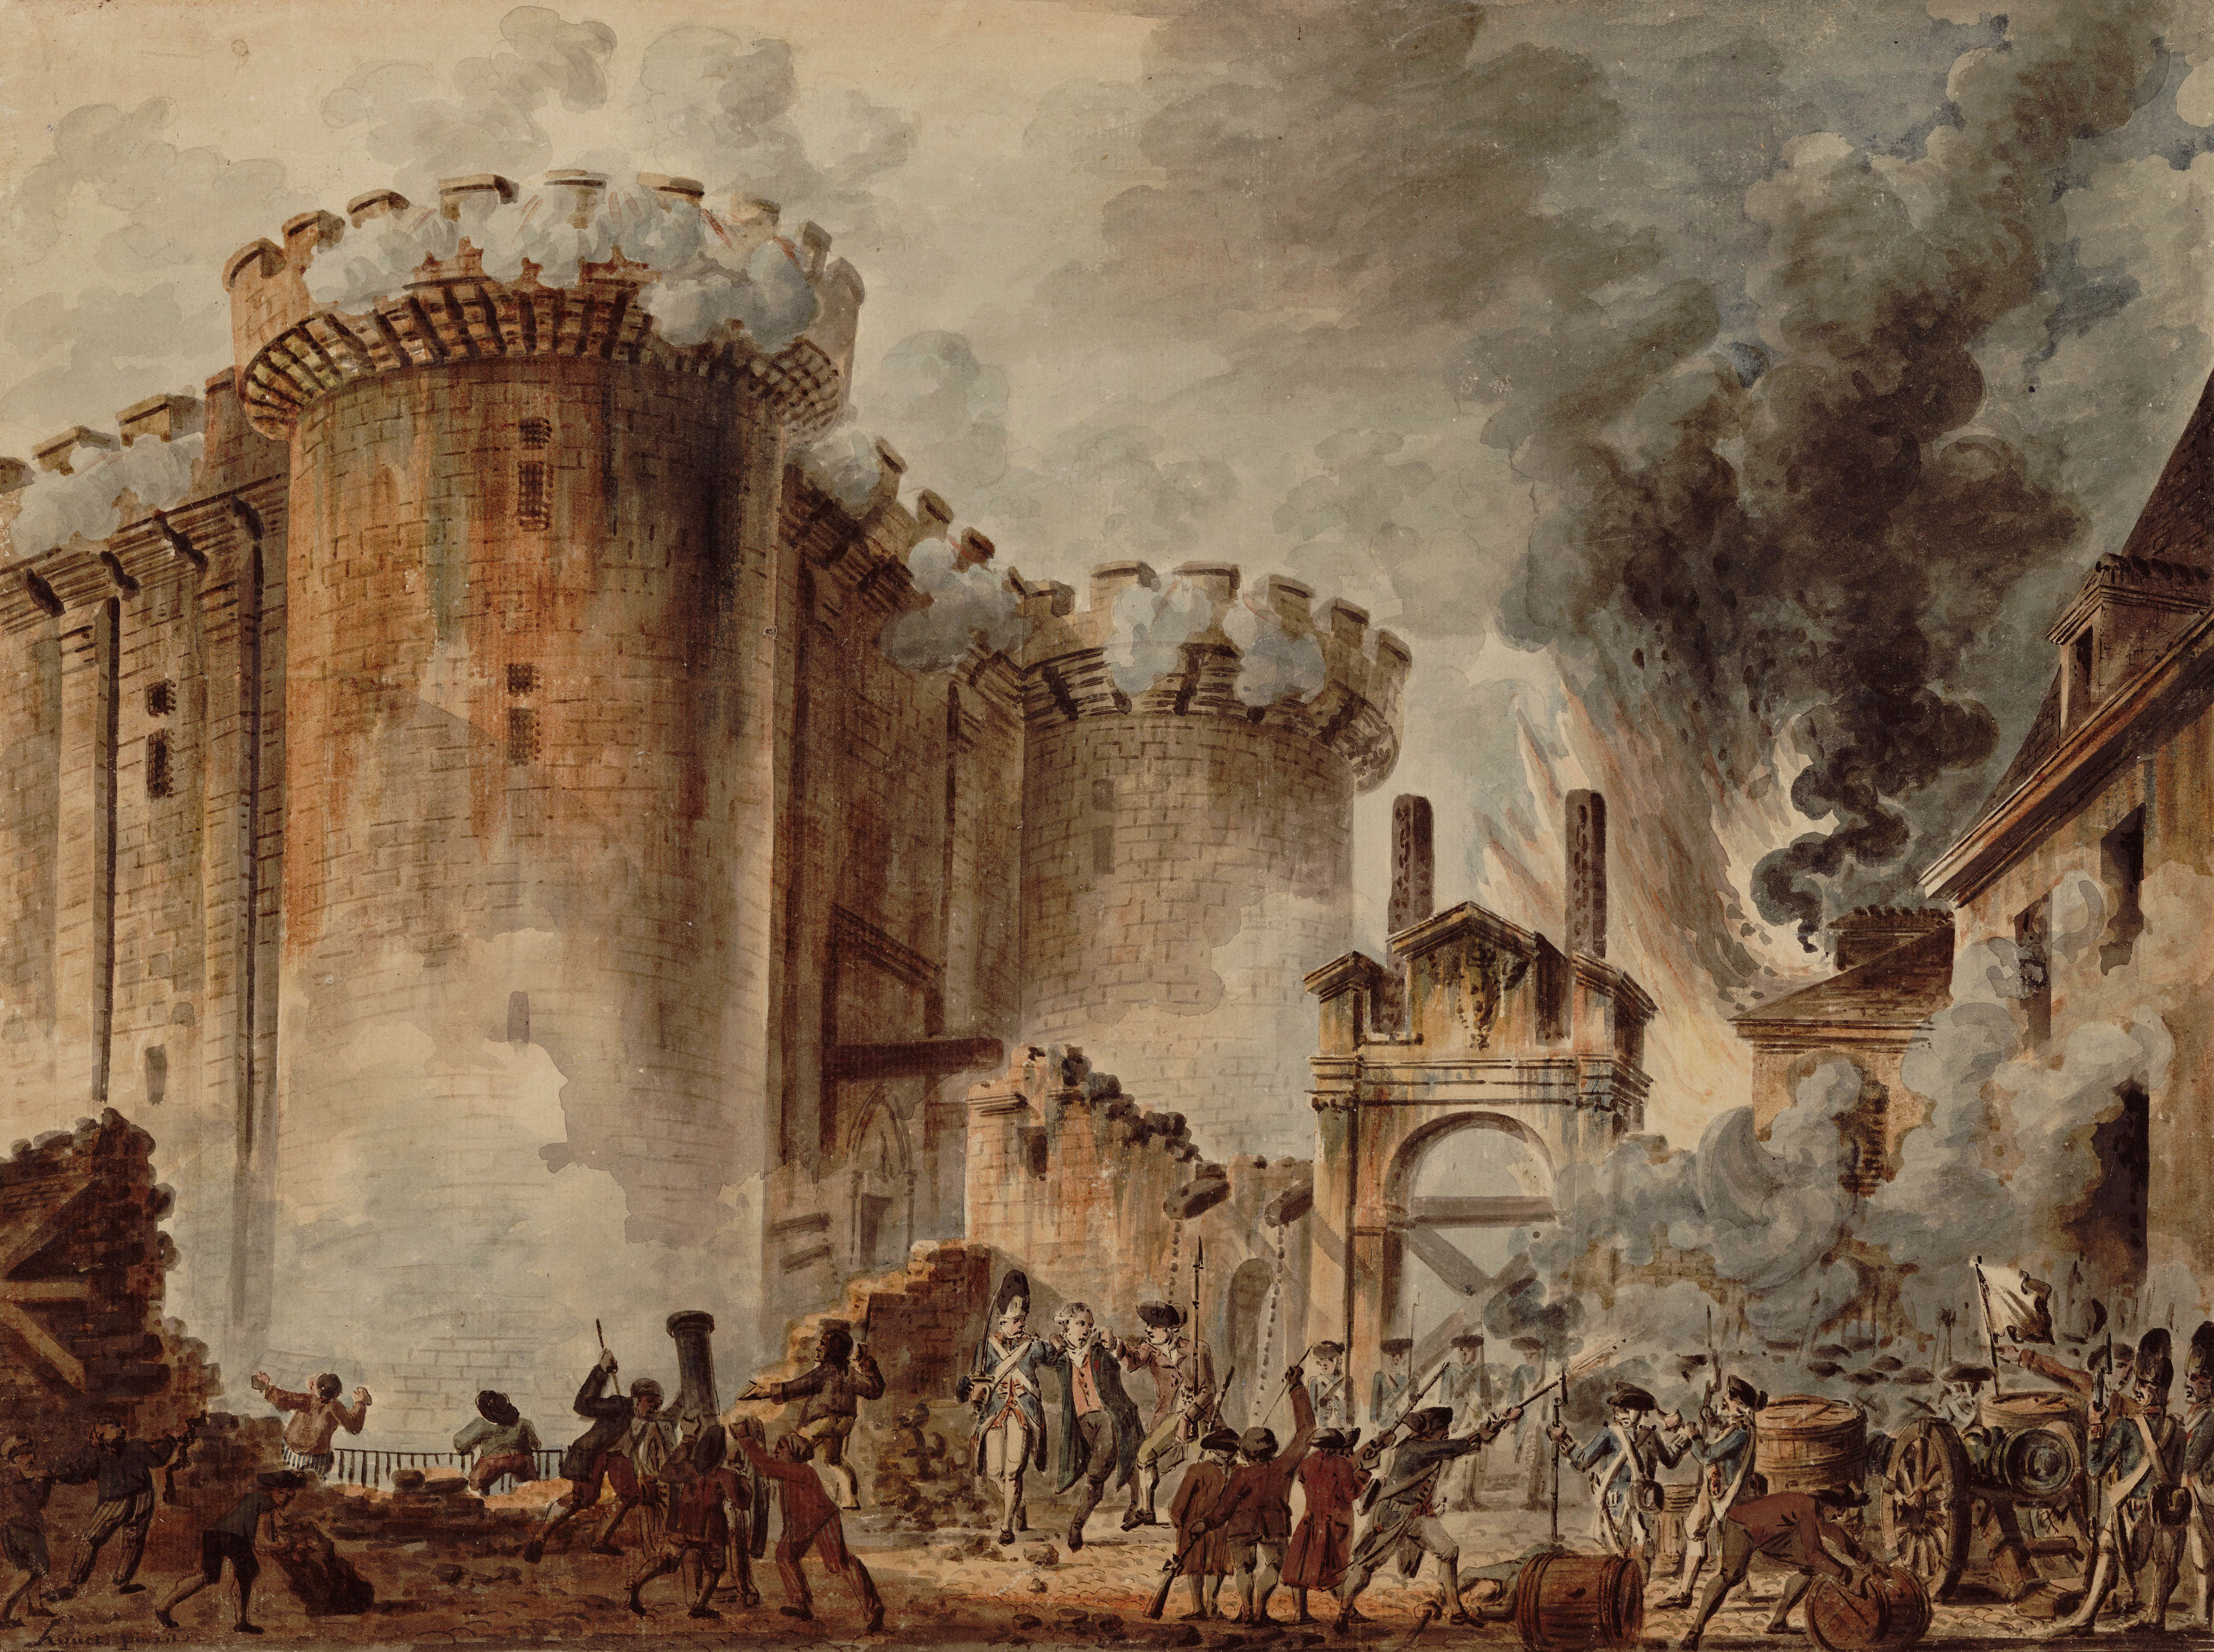 [storming of the Bastille]